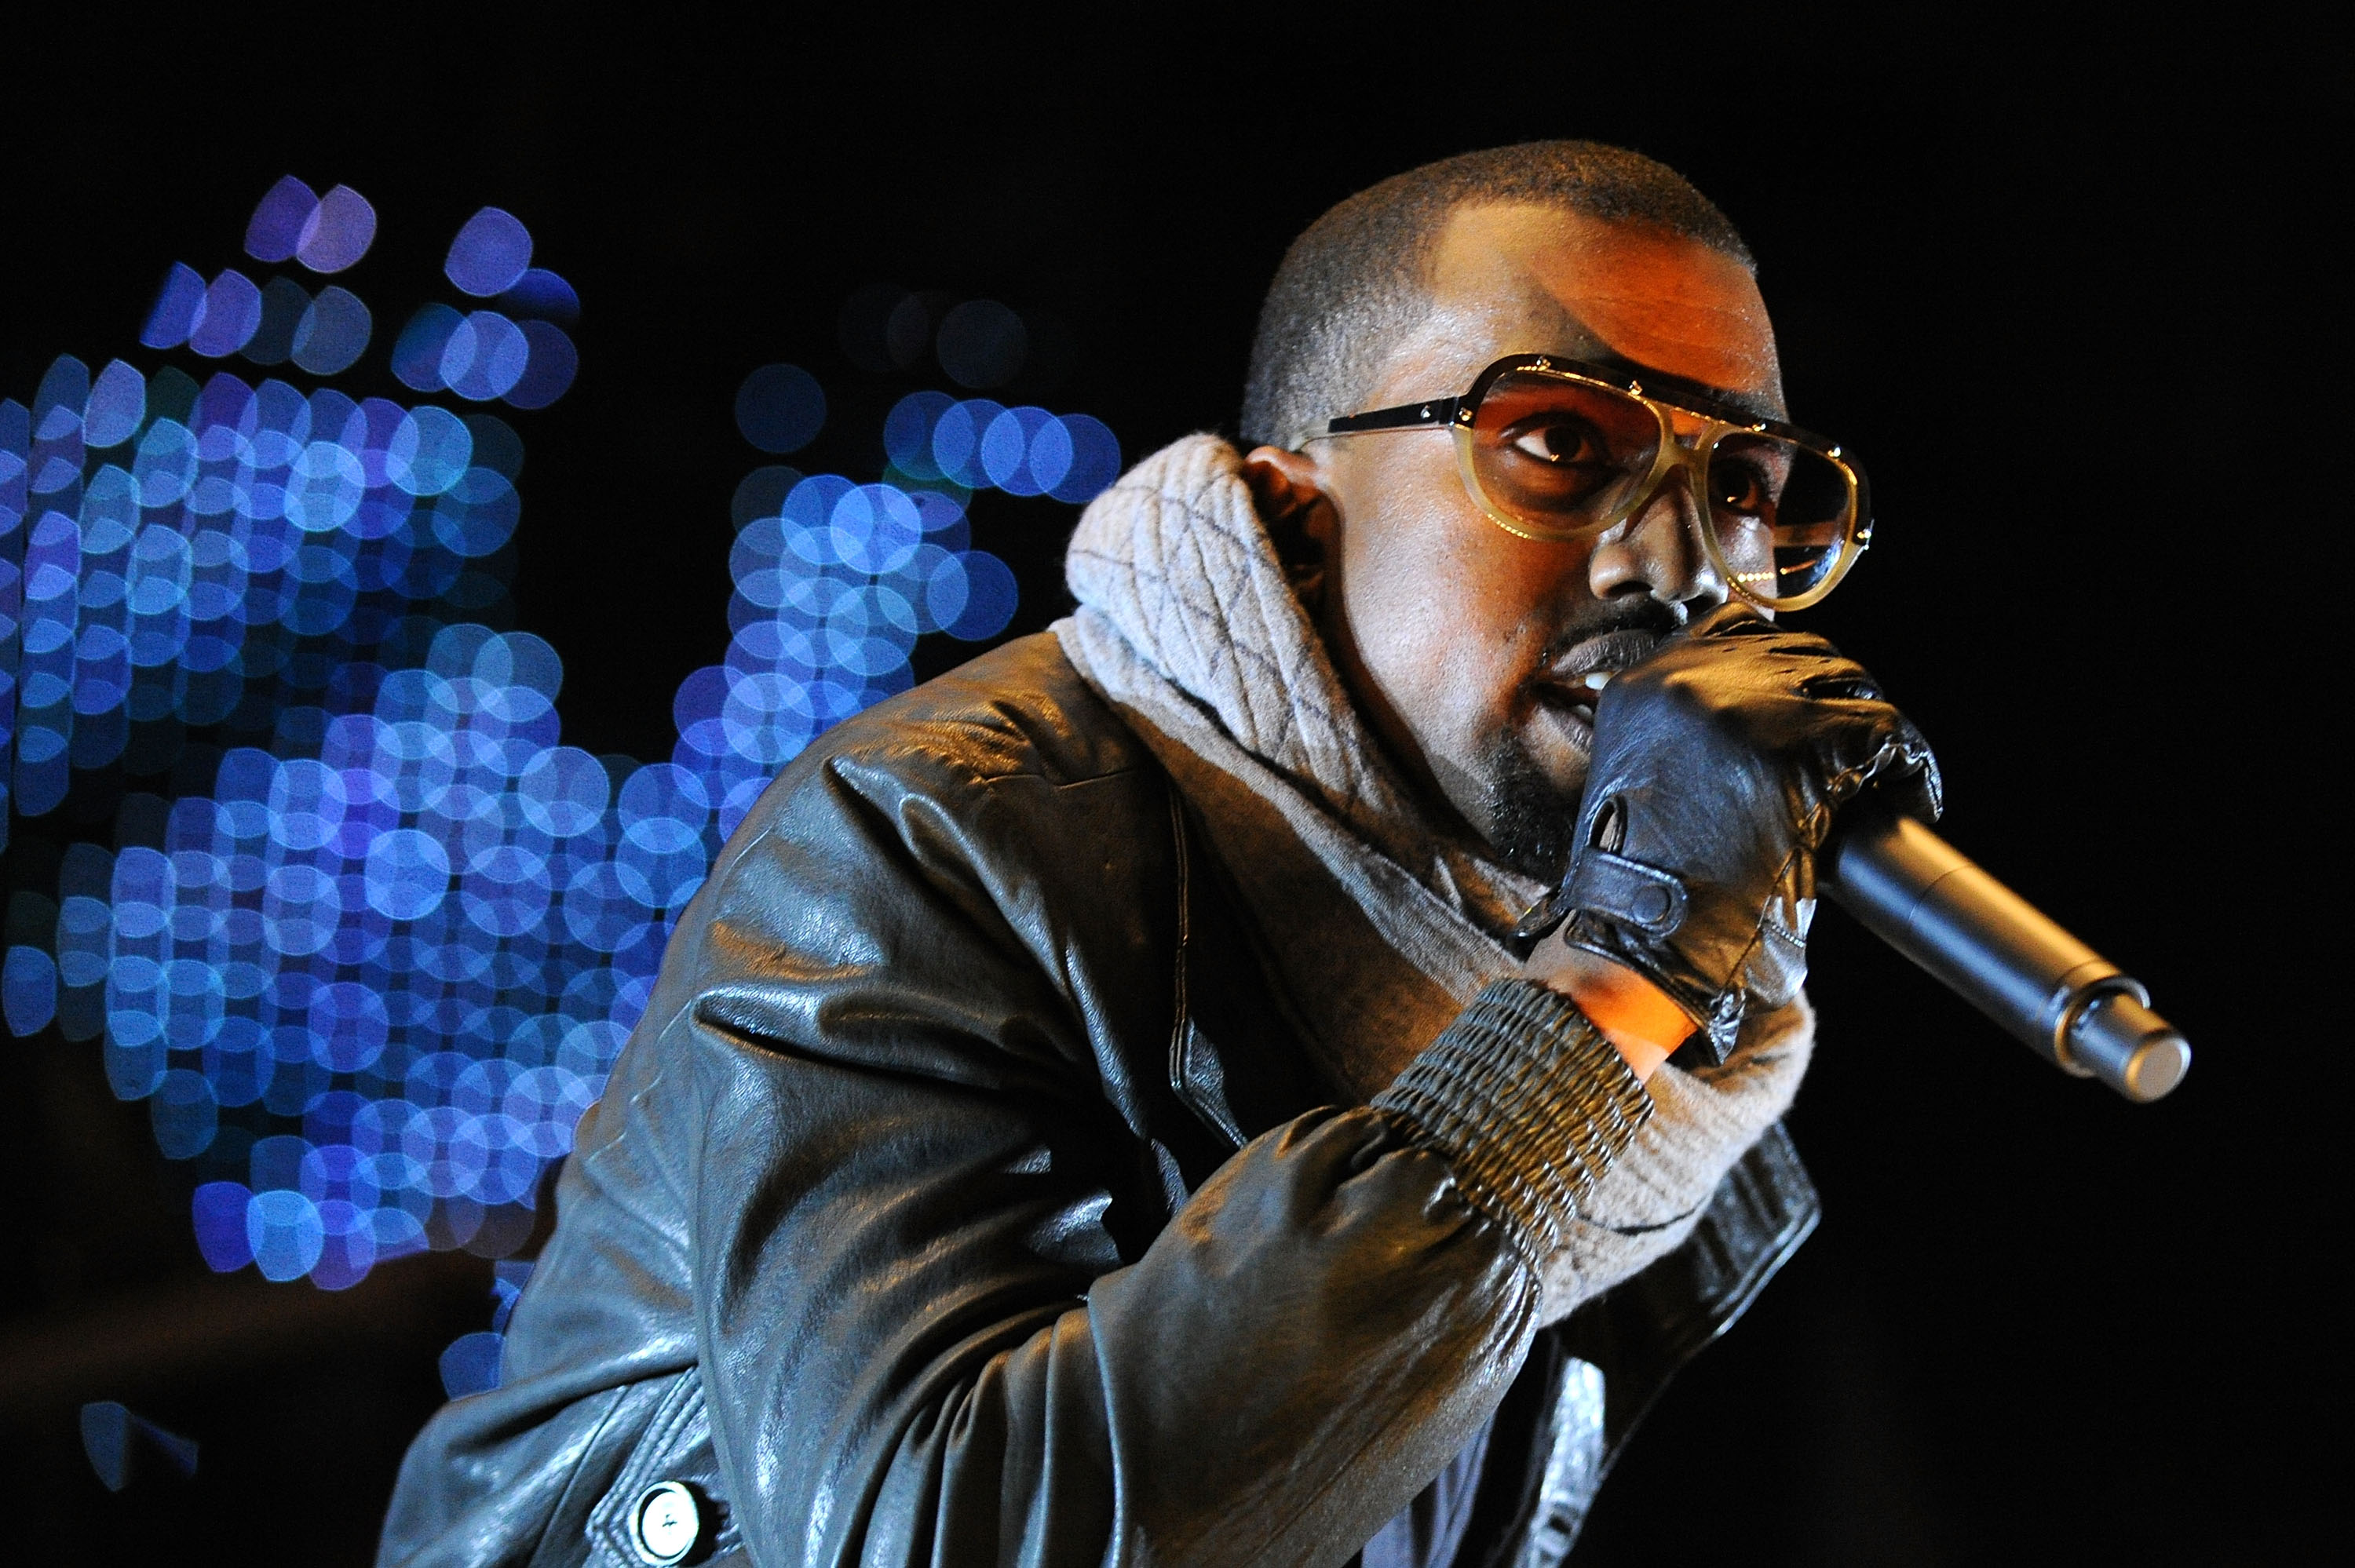 Kanye West finally announced his “Yeezus” tour. It’s his first solo